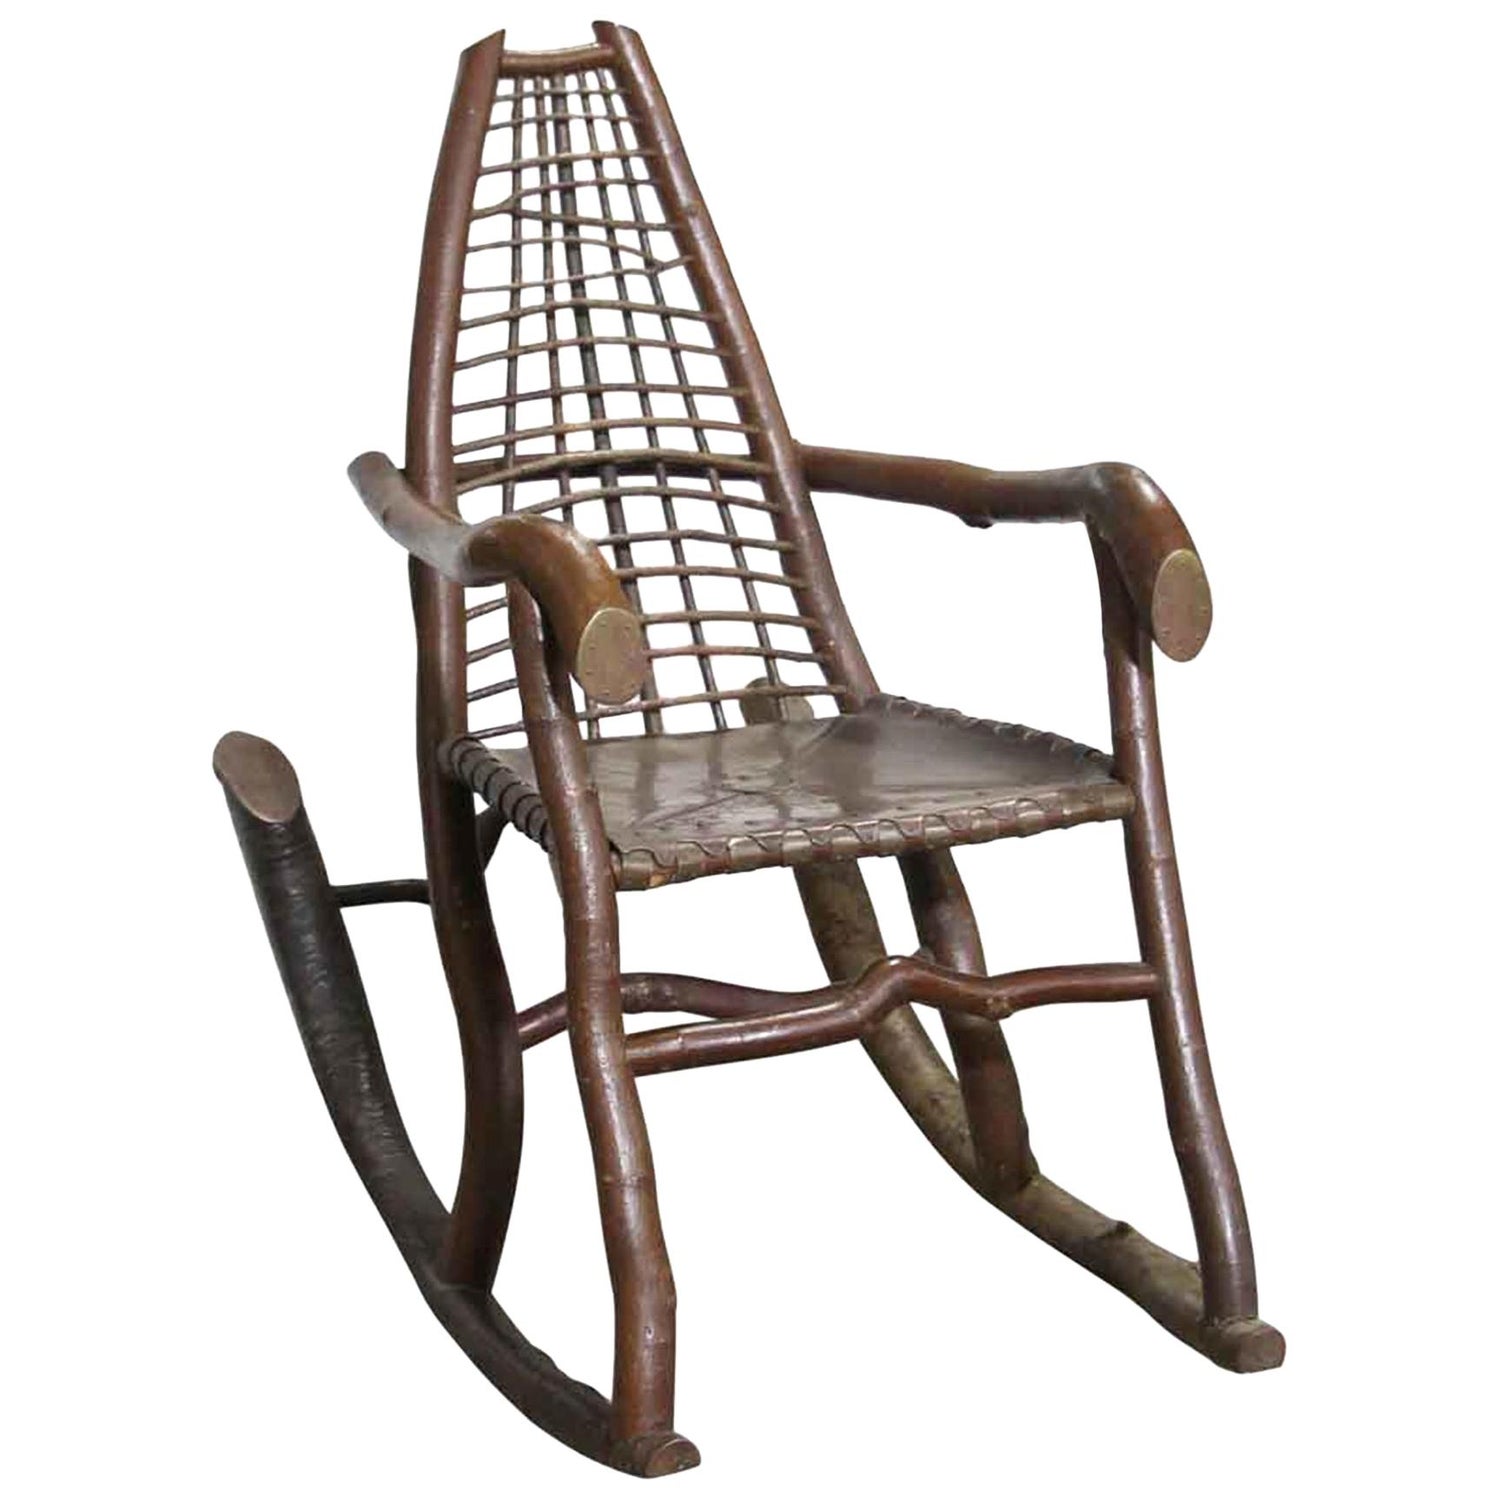 Handmade Birch And Copper Adirondack Rocking Chair For Sale At 1stdibs